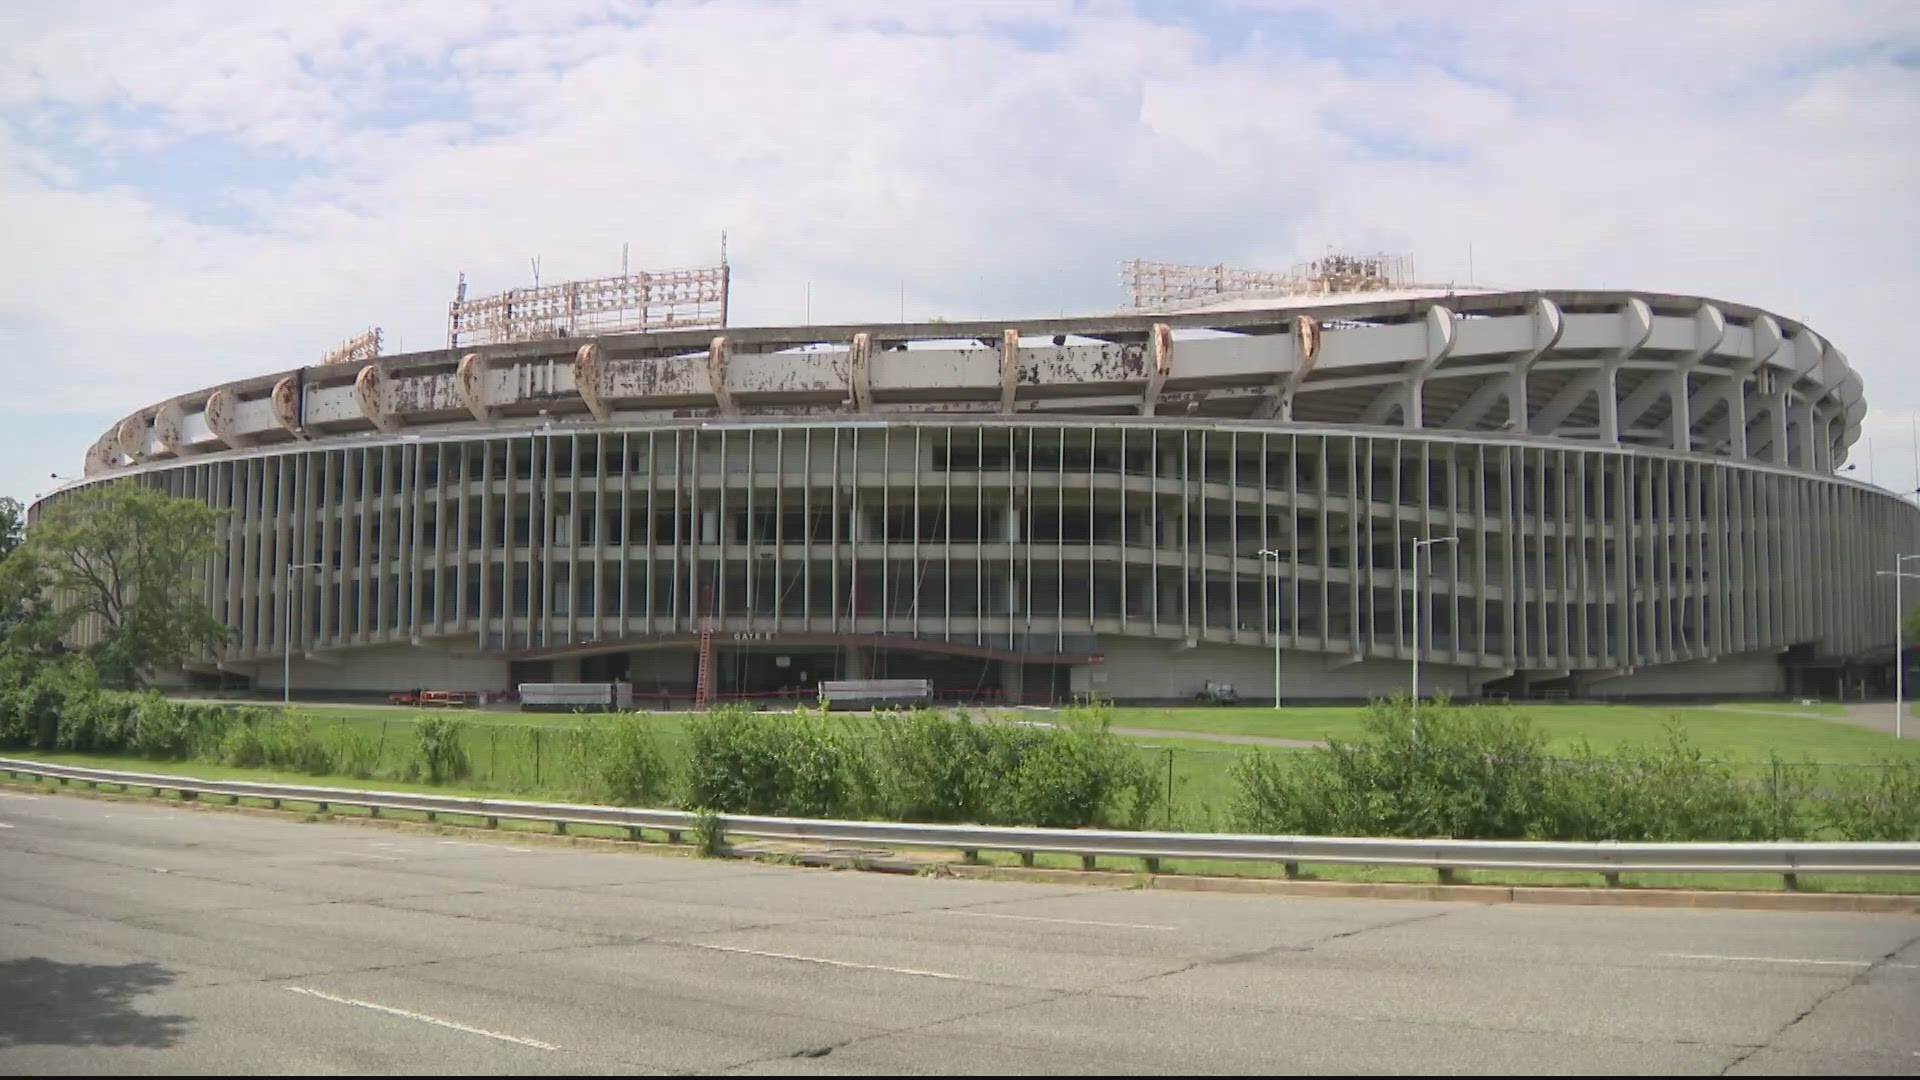 The bill would extend D.C.’s lease with the federal government for the RFK site for up to 99 years and expand how the site can be used.